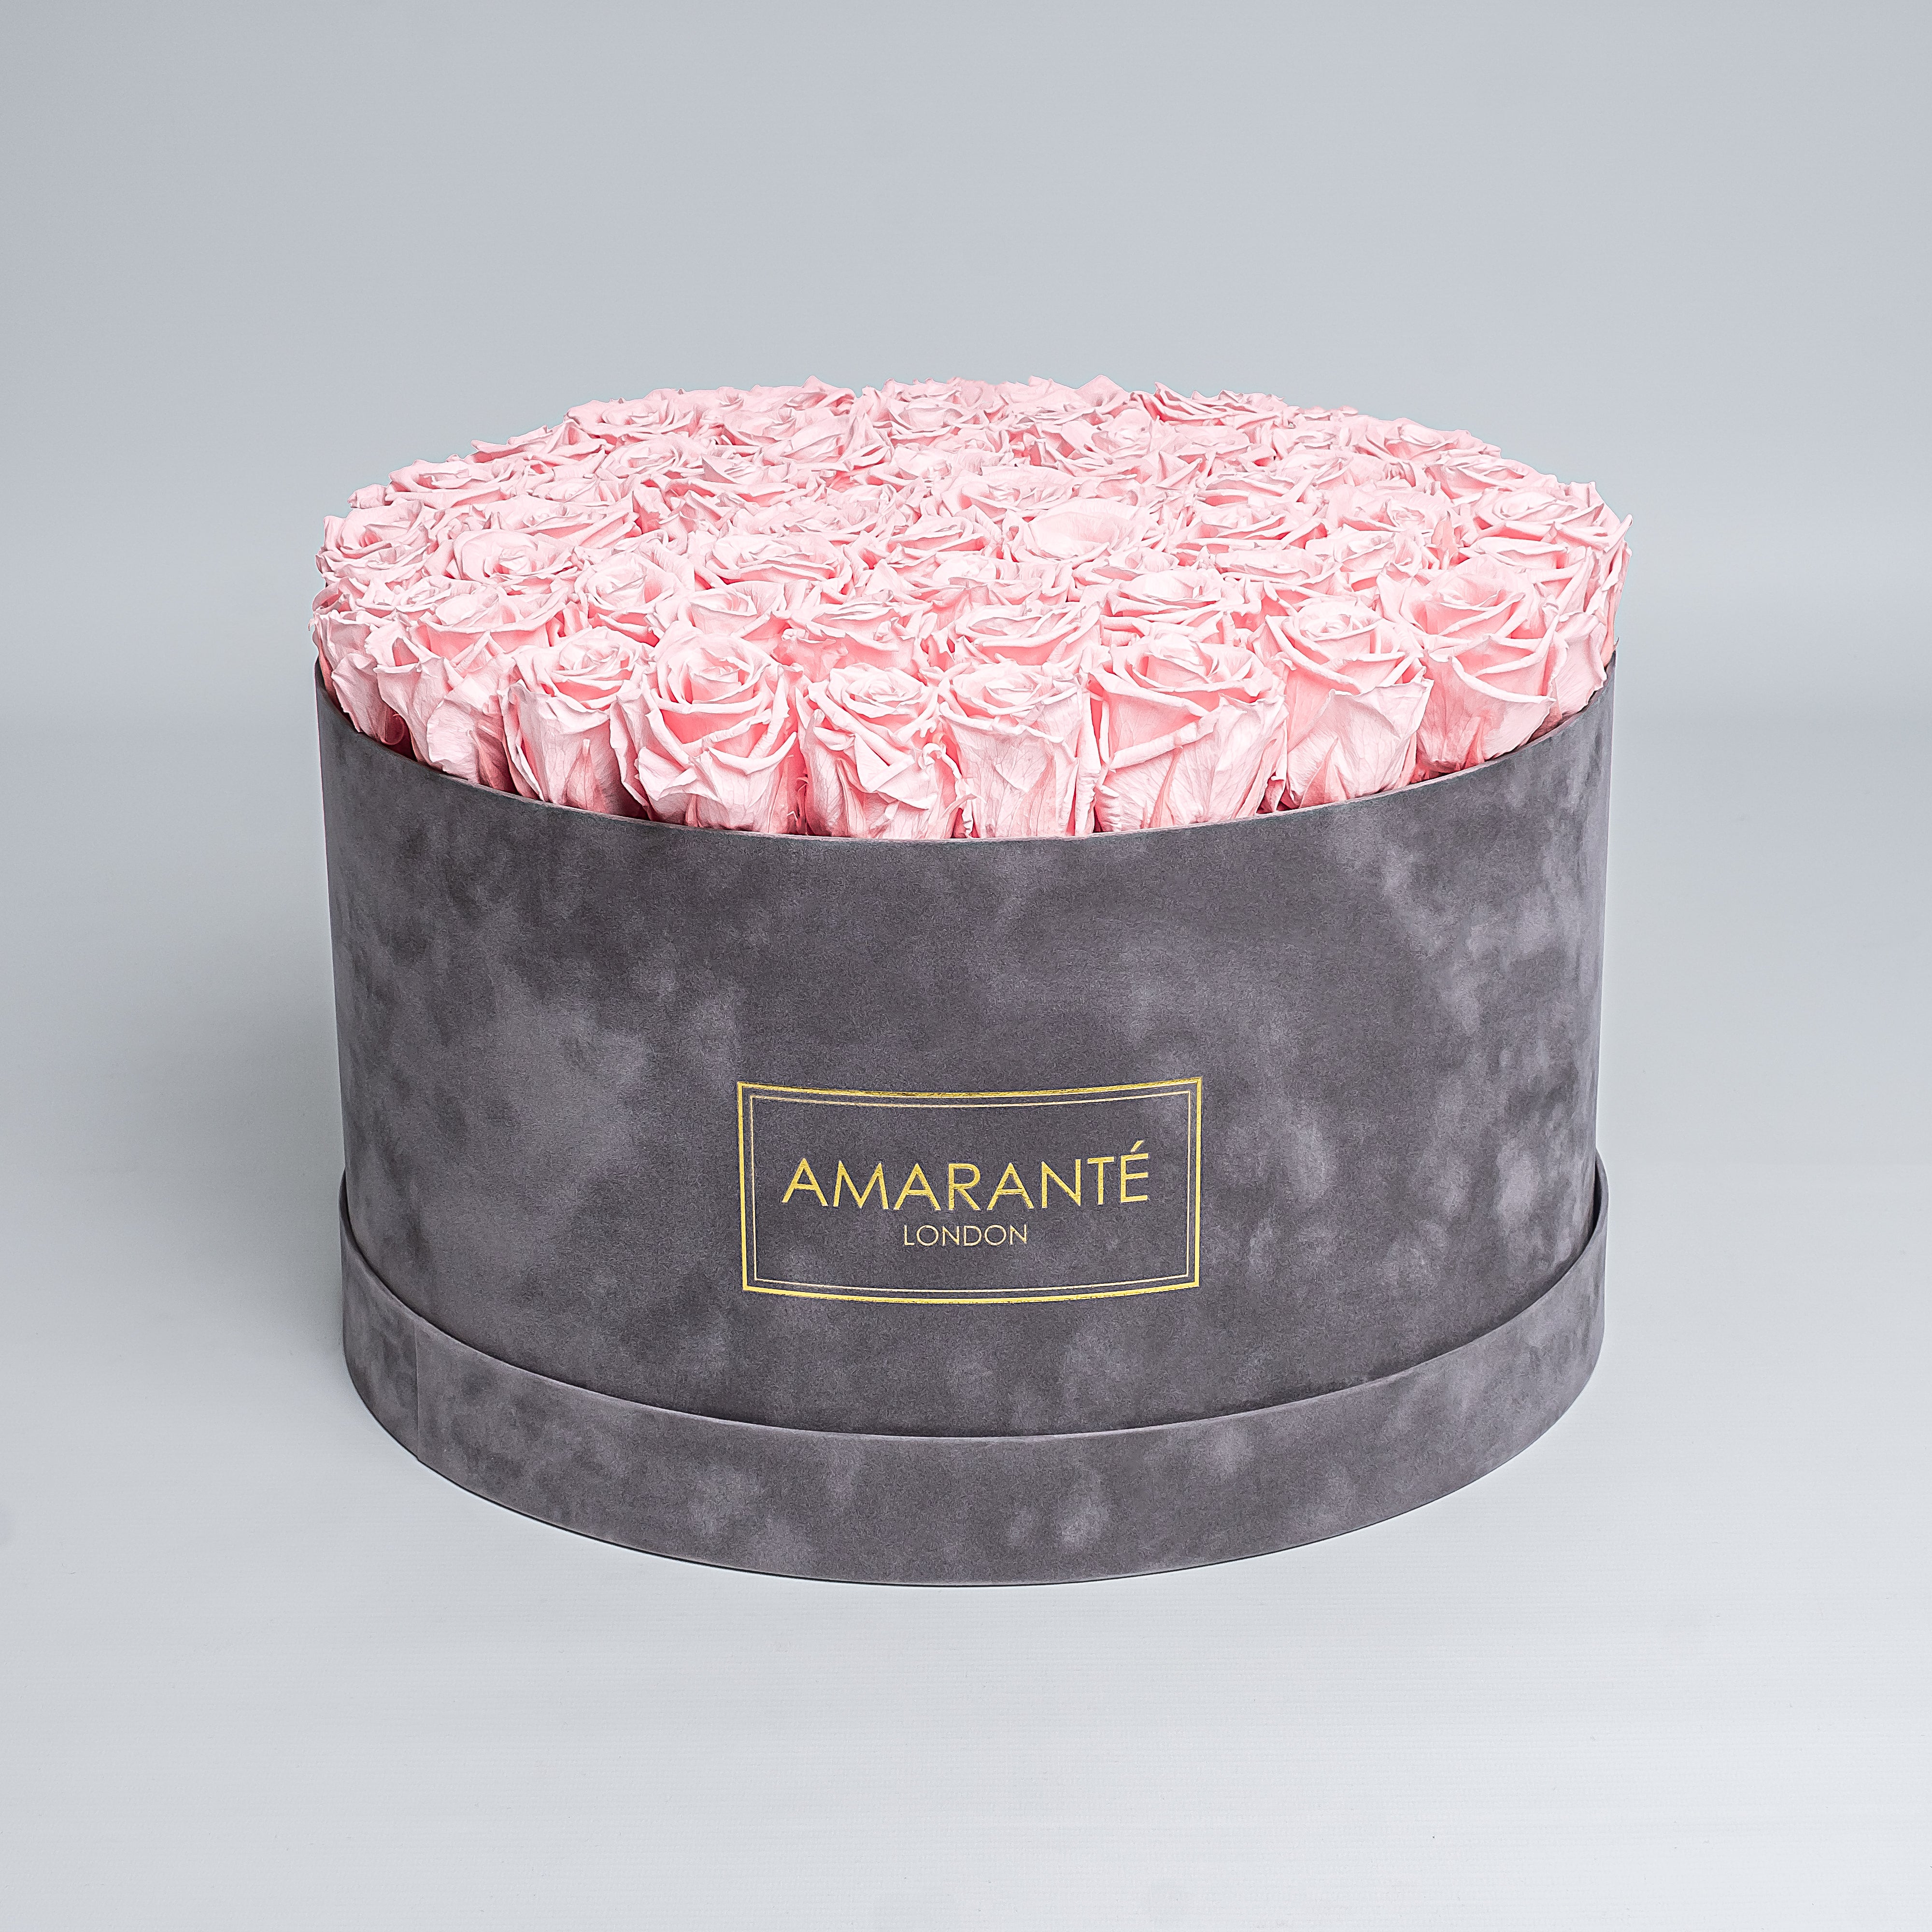 Exquisite delicate pink infinity roses in a sophisticated grey suede finish rose box. This chic, stylish gift idea, makes a thoughtful surprise for loved ones including mum, wife or a dear friend for any occasion, from Valentine&#39;s Day, to a Birthday or Anniversary or other important occasion. Free UK Delivery.